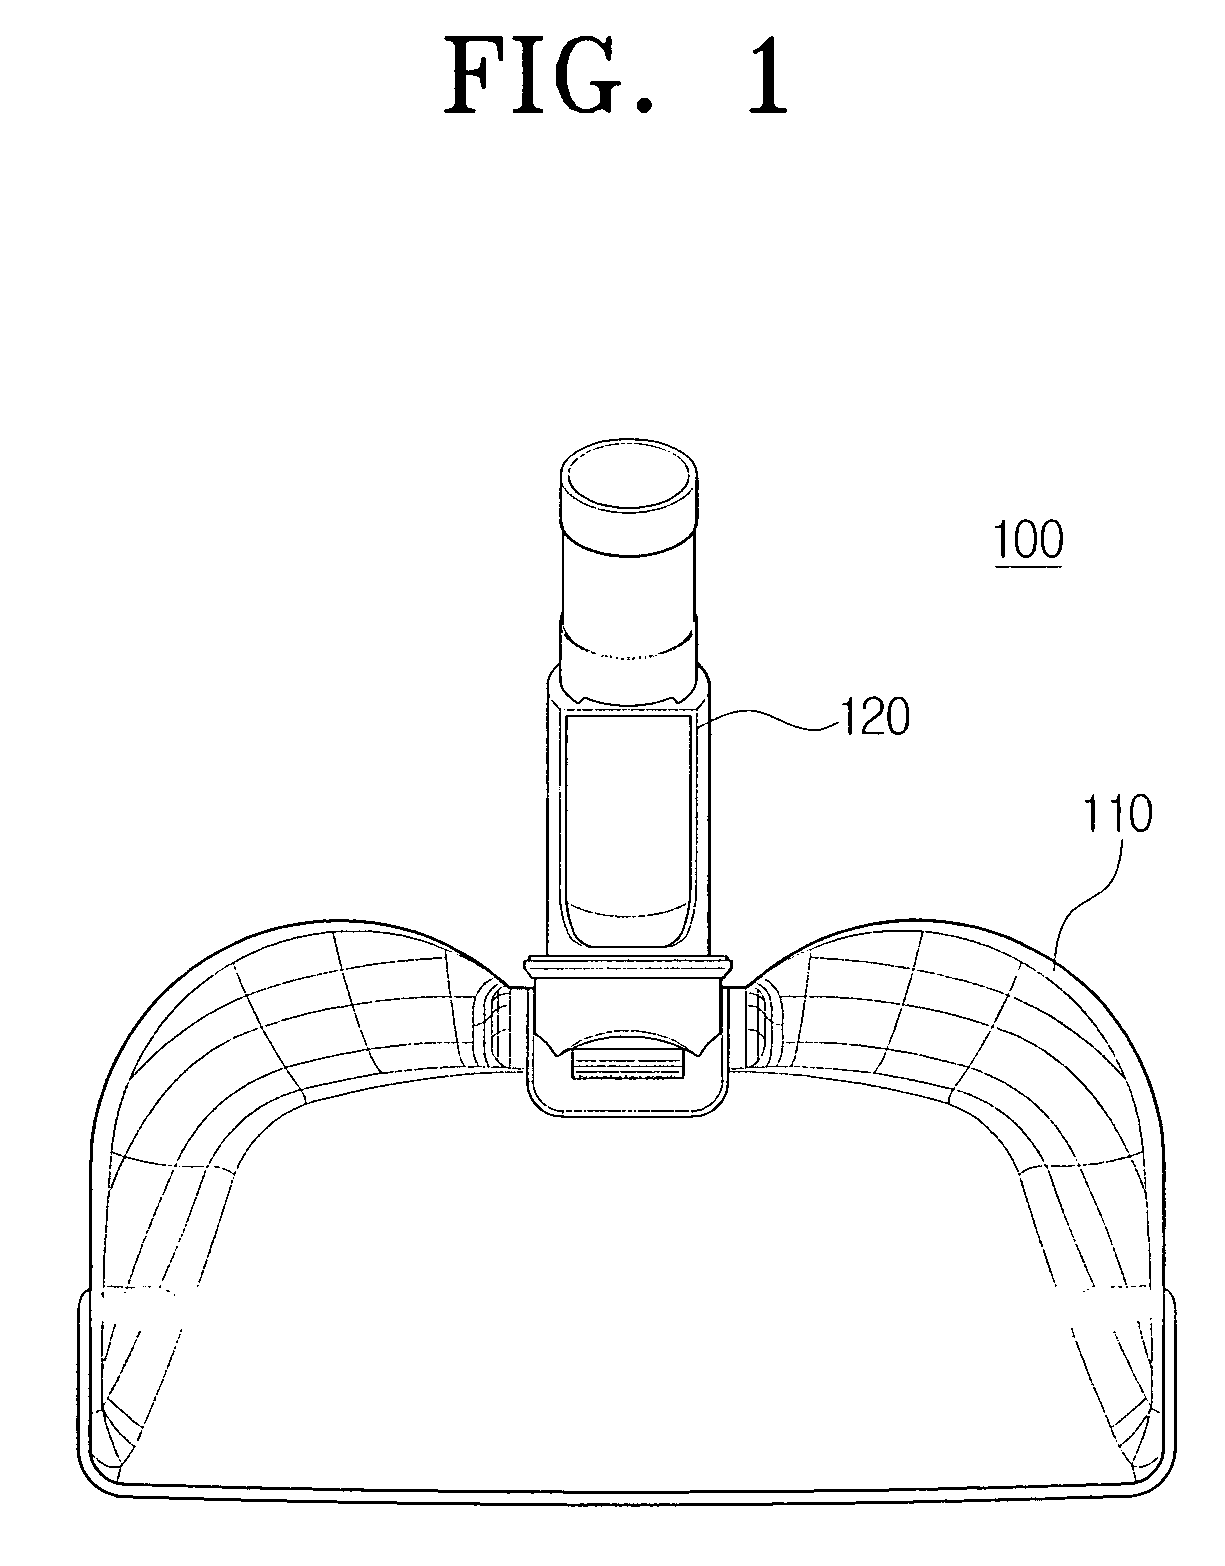 Suction brush assembly